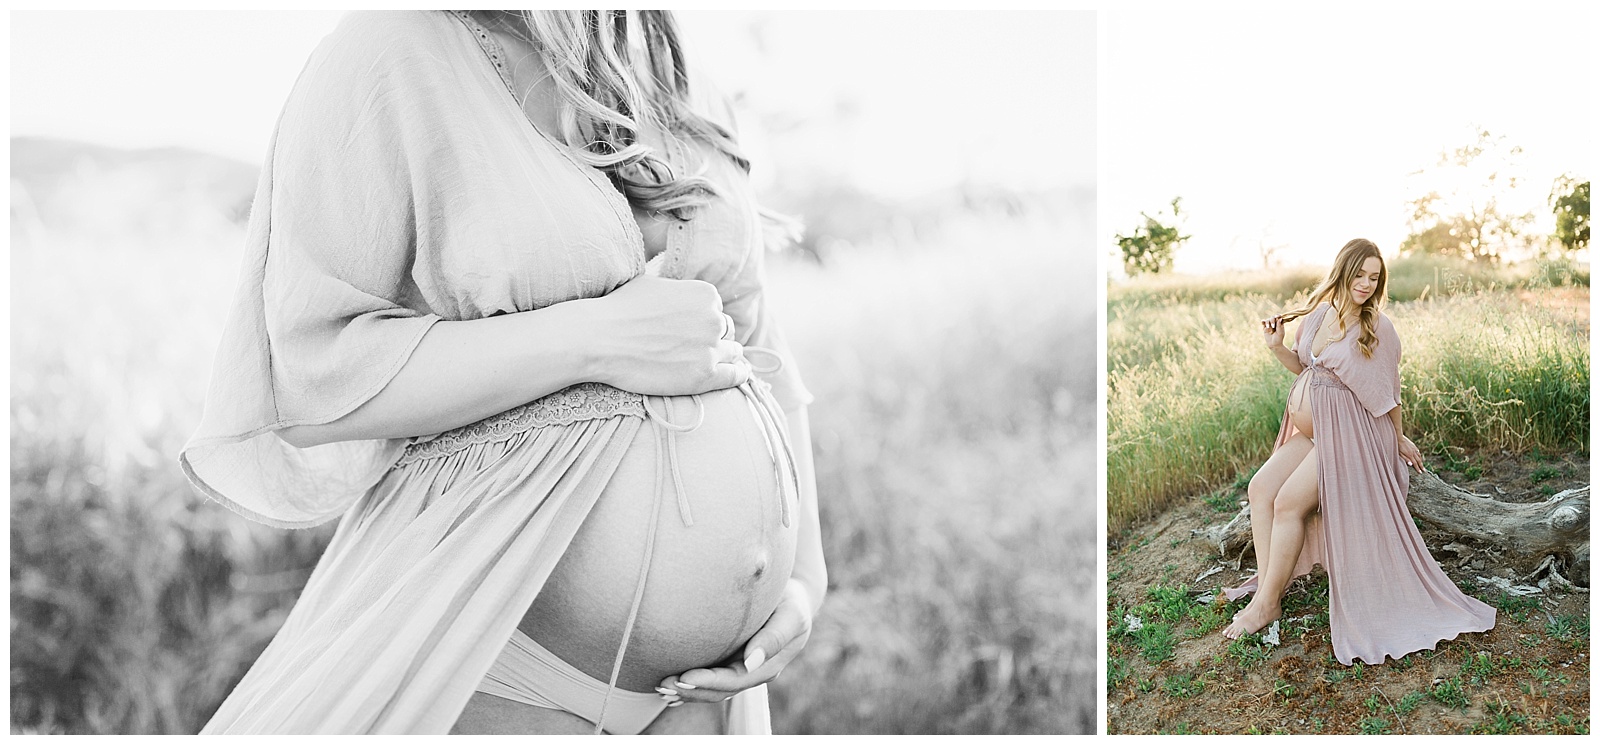  pregnant woman in a grassy field and sunset with an open belly maternity dress